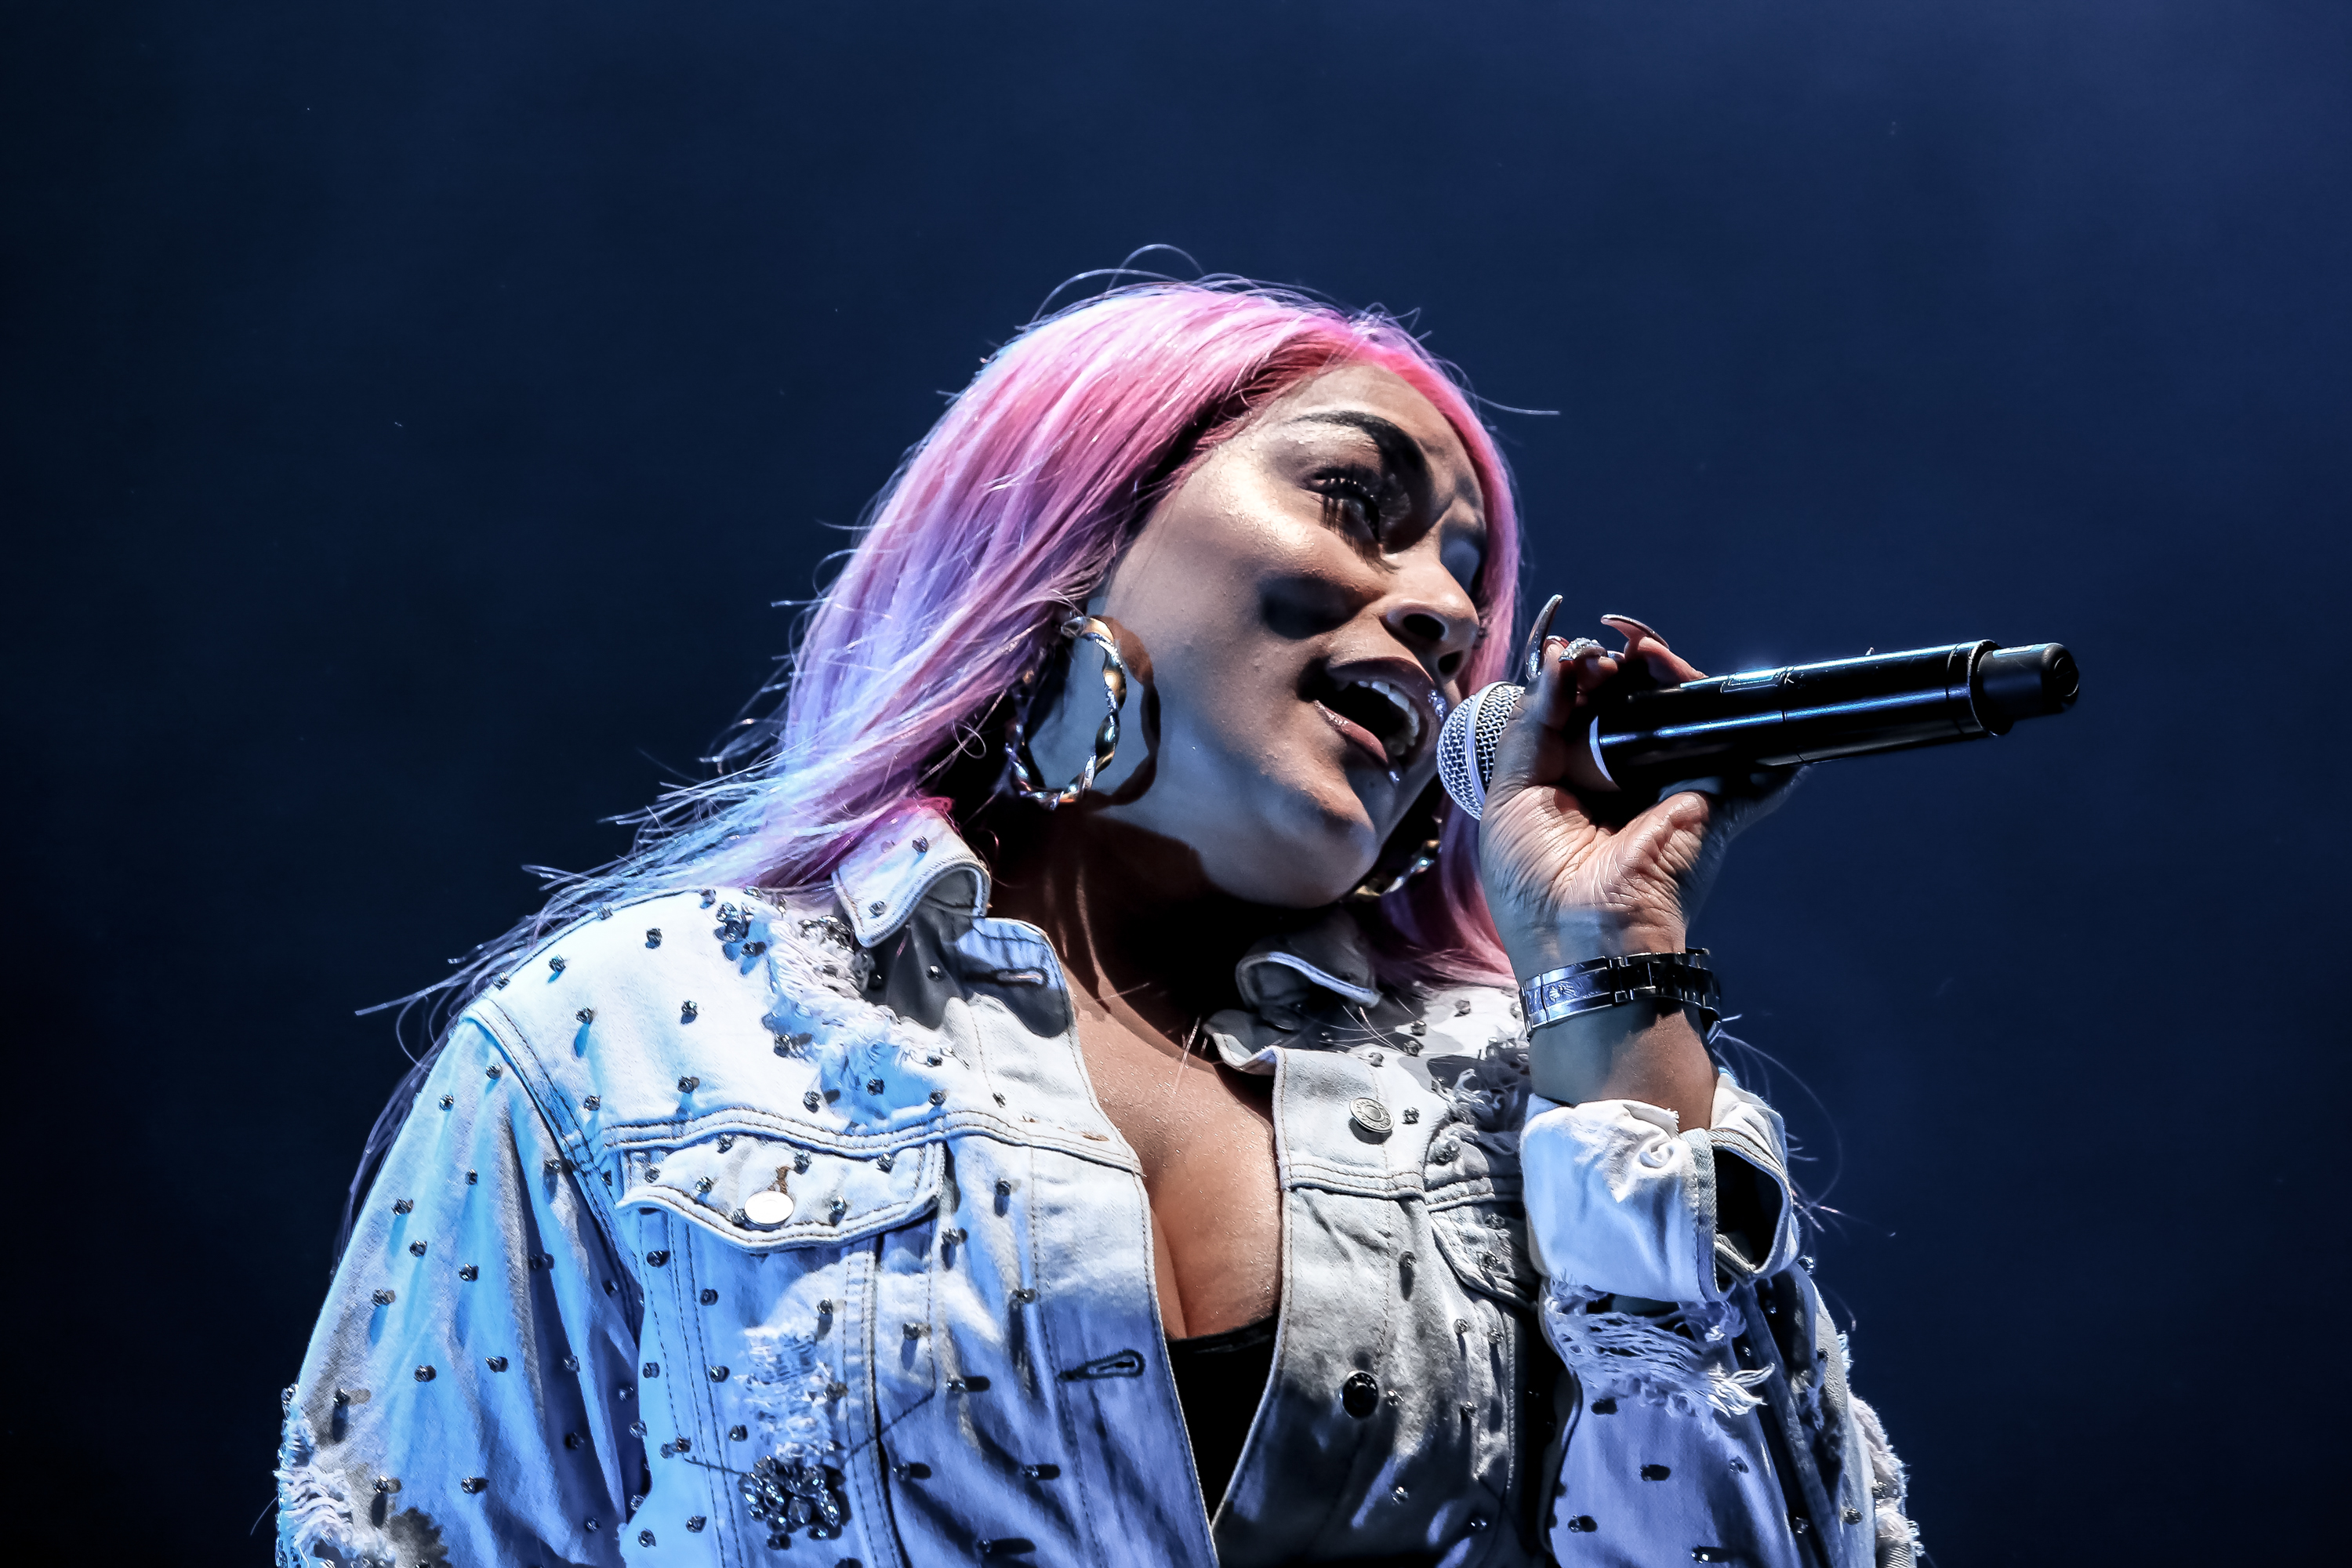 Stefflon Don performs on stage at The Royal Albert Hall